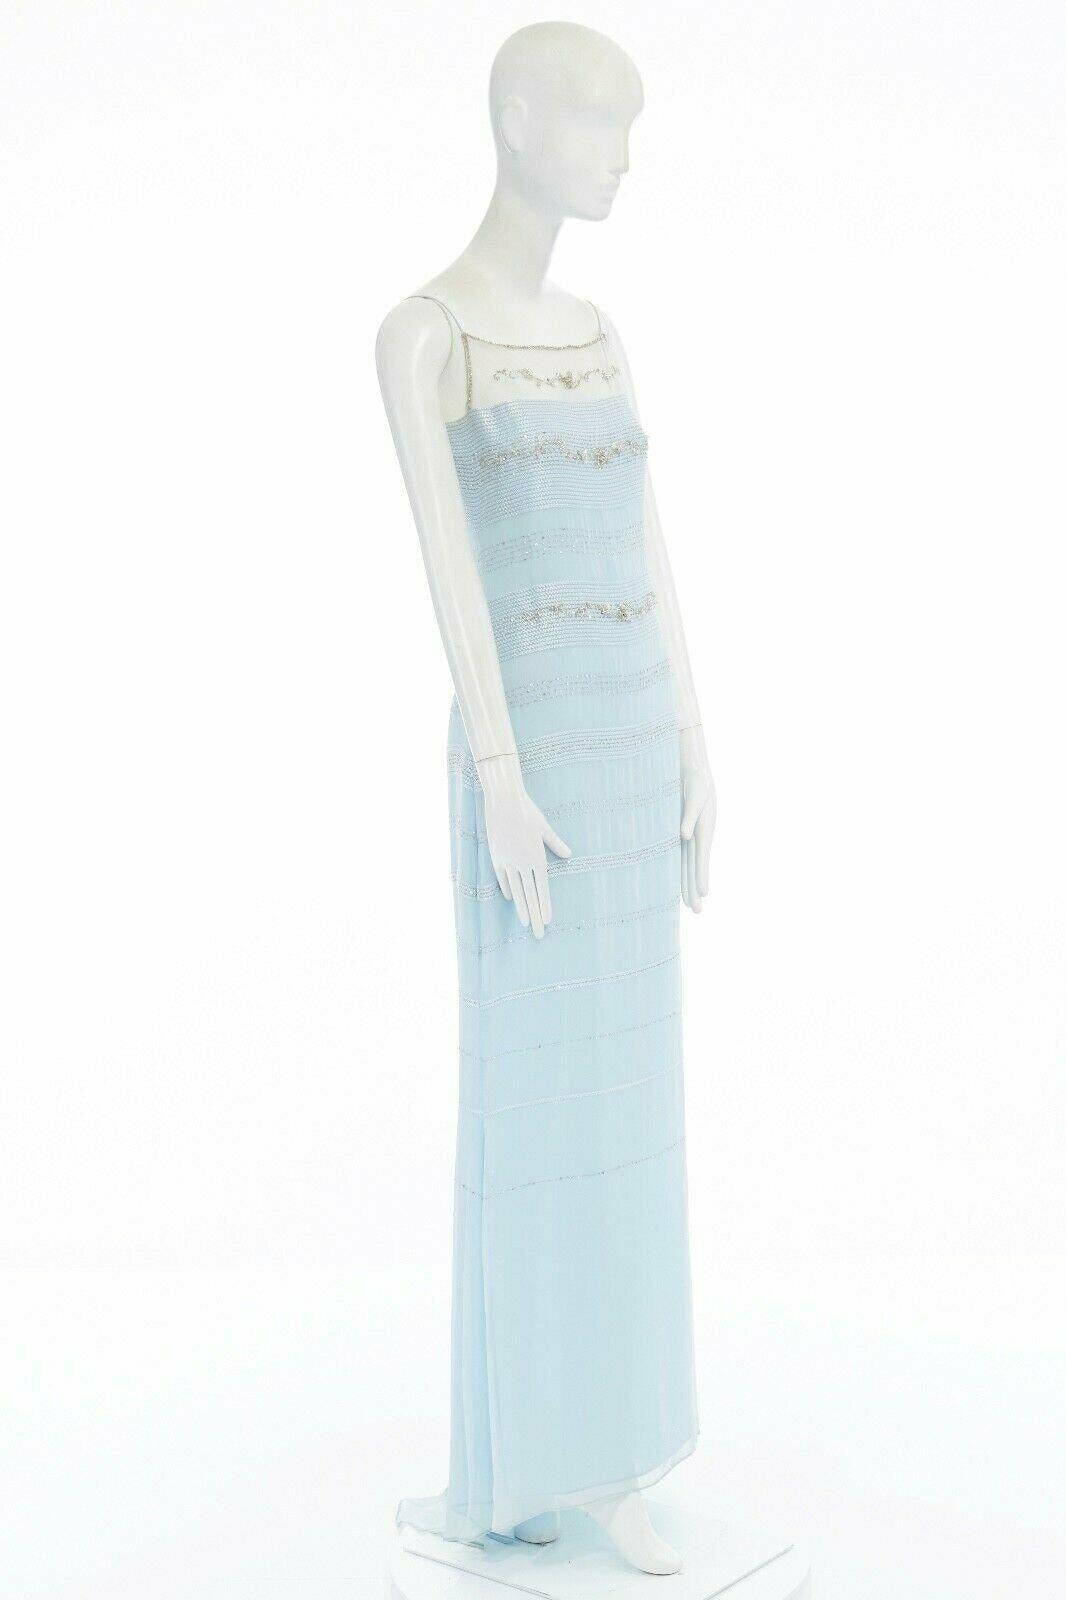 BADGLEY MISCHKA sky blue silk bead embellished embroidered gown dress UK10 
Reference: LACG/A00213 
Brand: Badgley Mischka 
Designer: Badgley Mischka 
Color: Blue 
Closure: Zip 
Extra Detail: 100% silk. Light blue. Spaghetti strap. White mesh